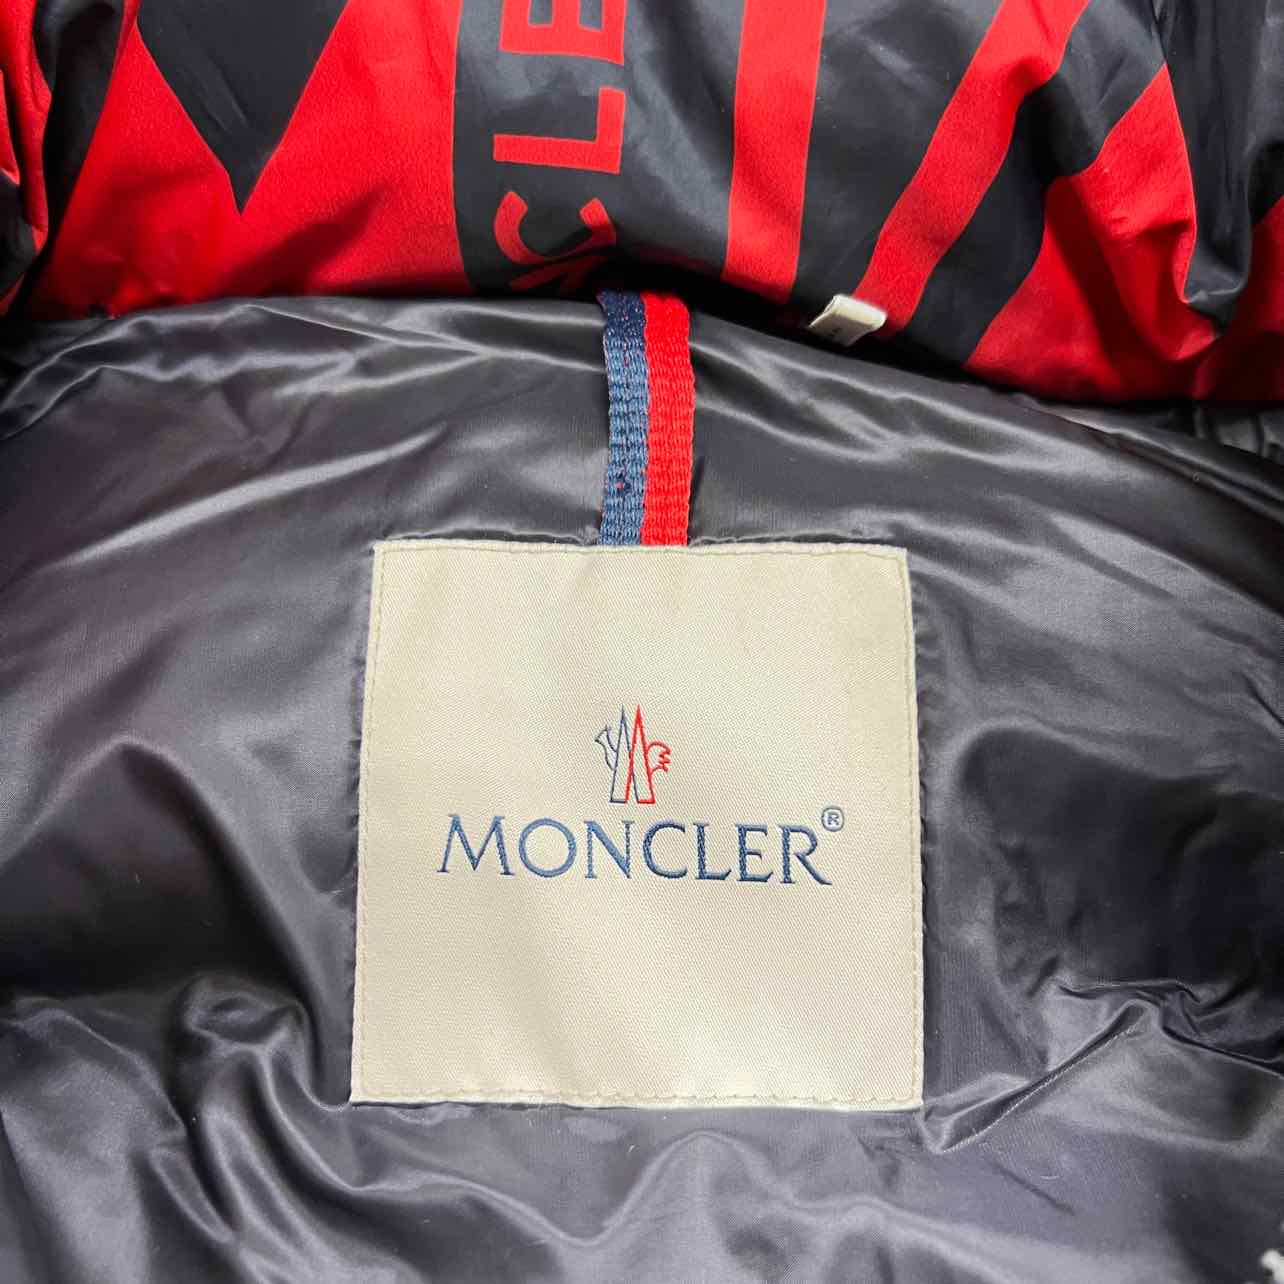 Moncler Jacket &quot;FRIOLAND GIUBBOTTO&quot; Red Used Size 4